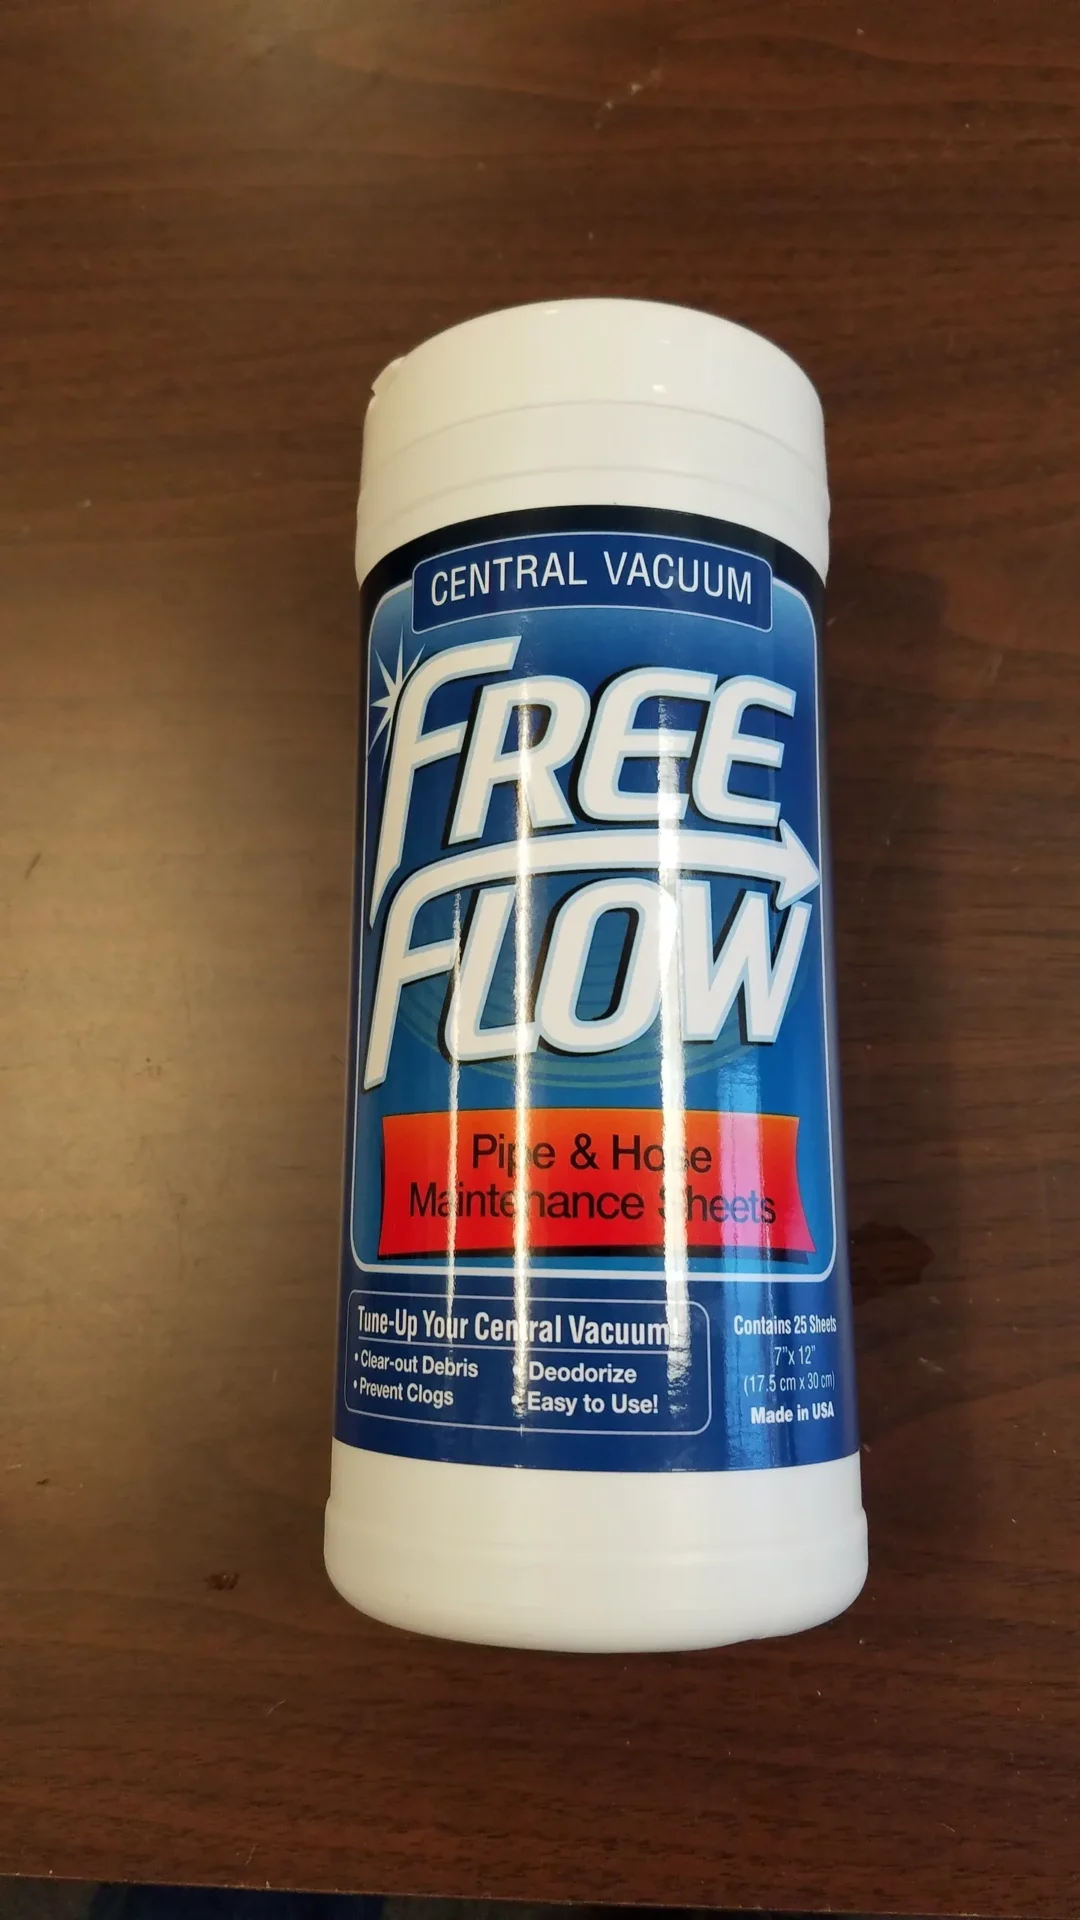 A tube of free flow is sitting on the table.